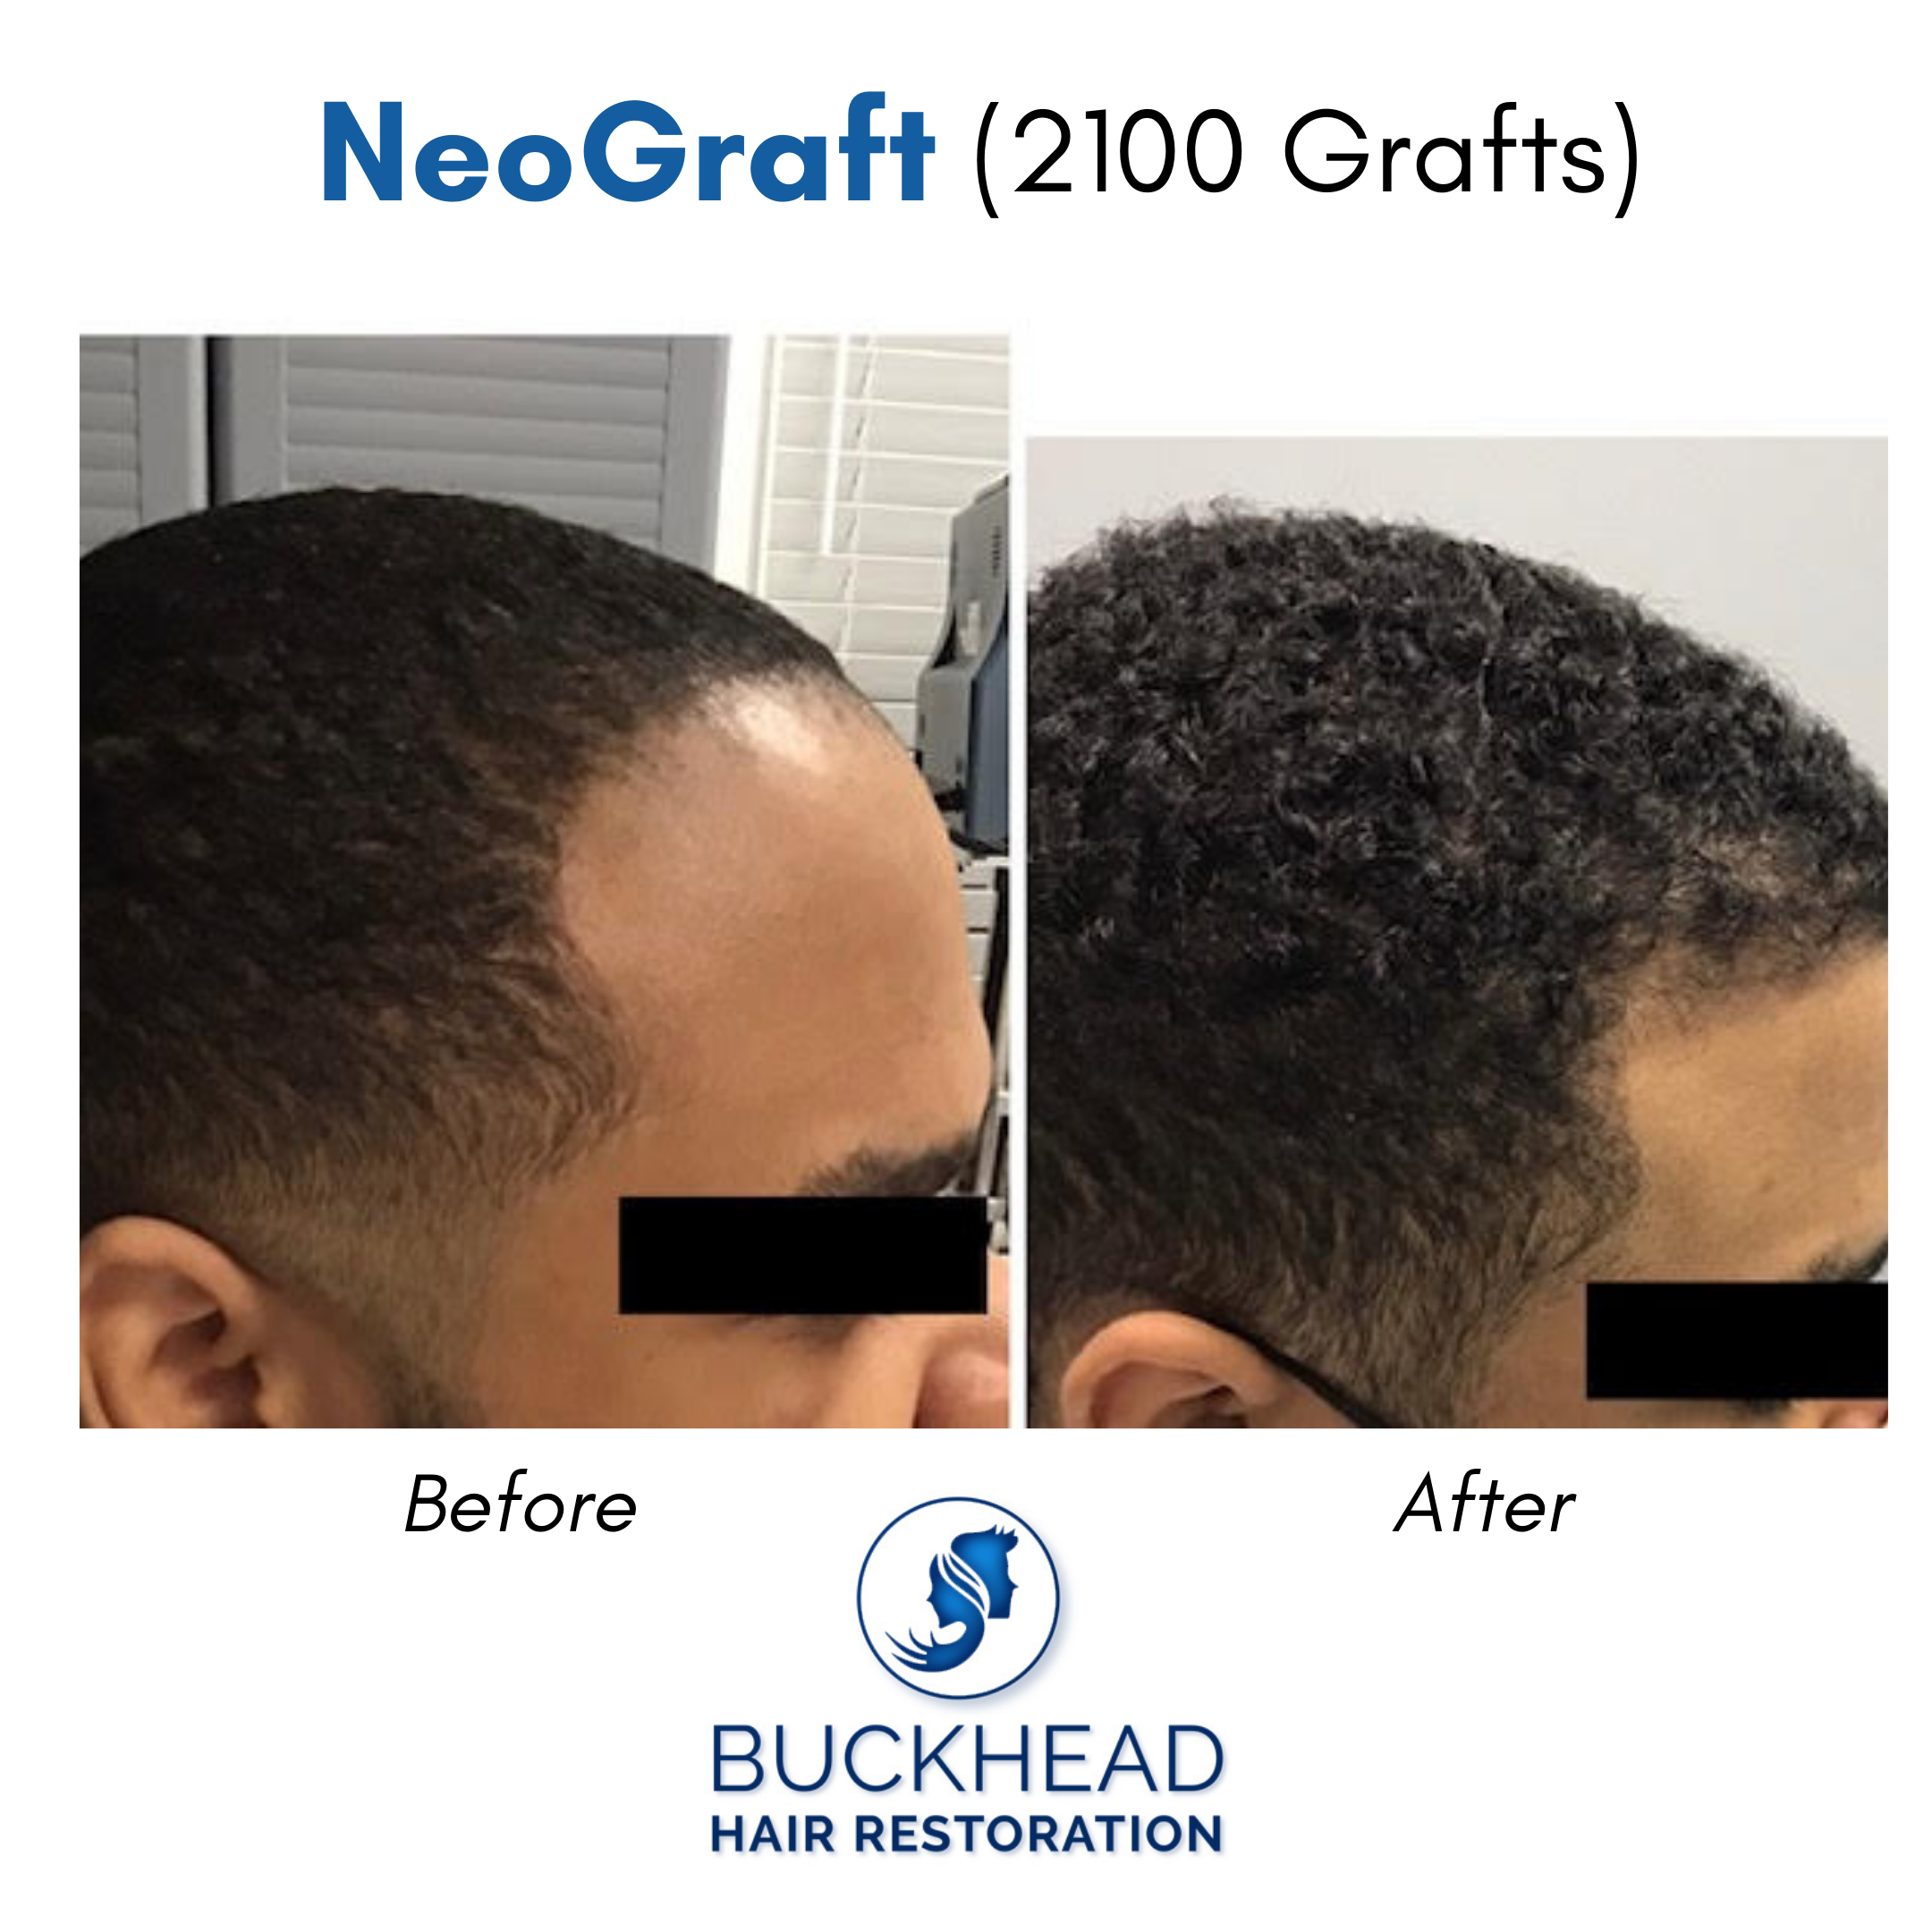 NeoGraft Overview | No Linear Scar | Fast Recovery | Buckhead Location